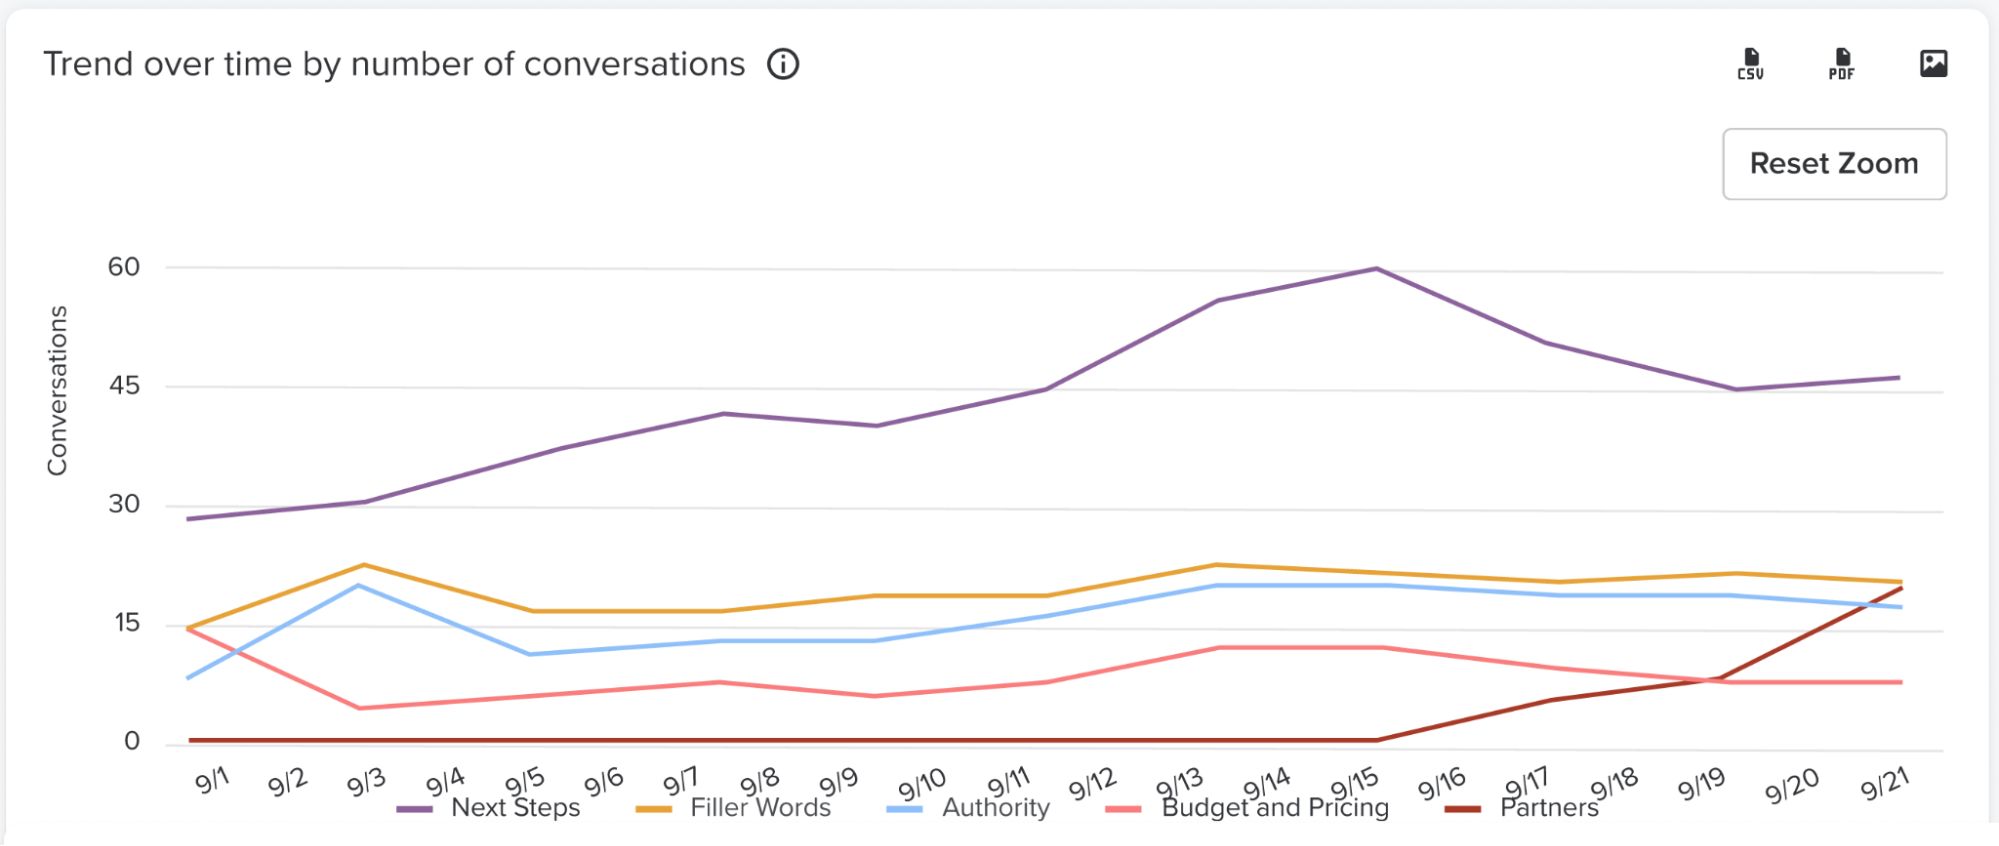 Screenshot of Trends over time by number of conversations in the Salesloft platform